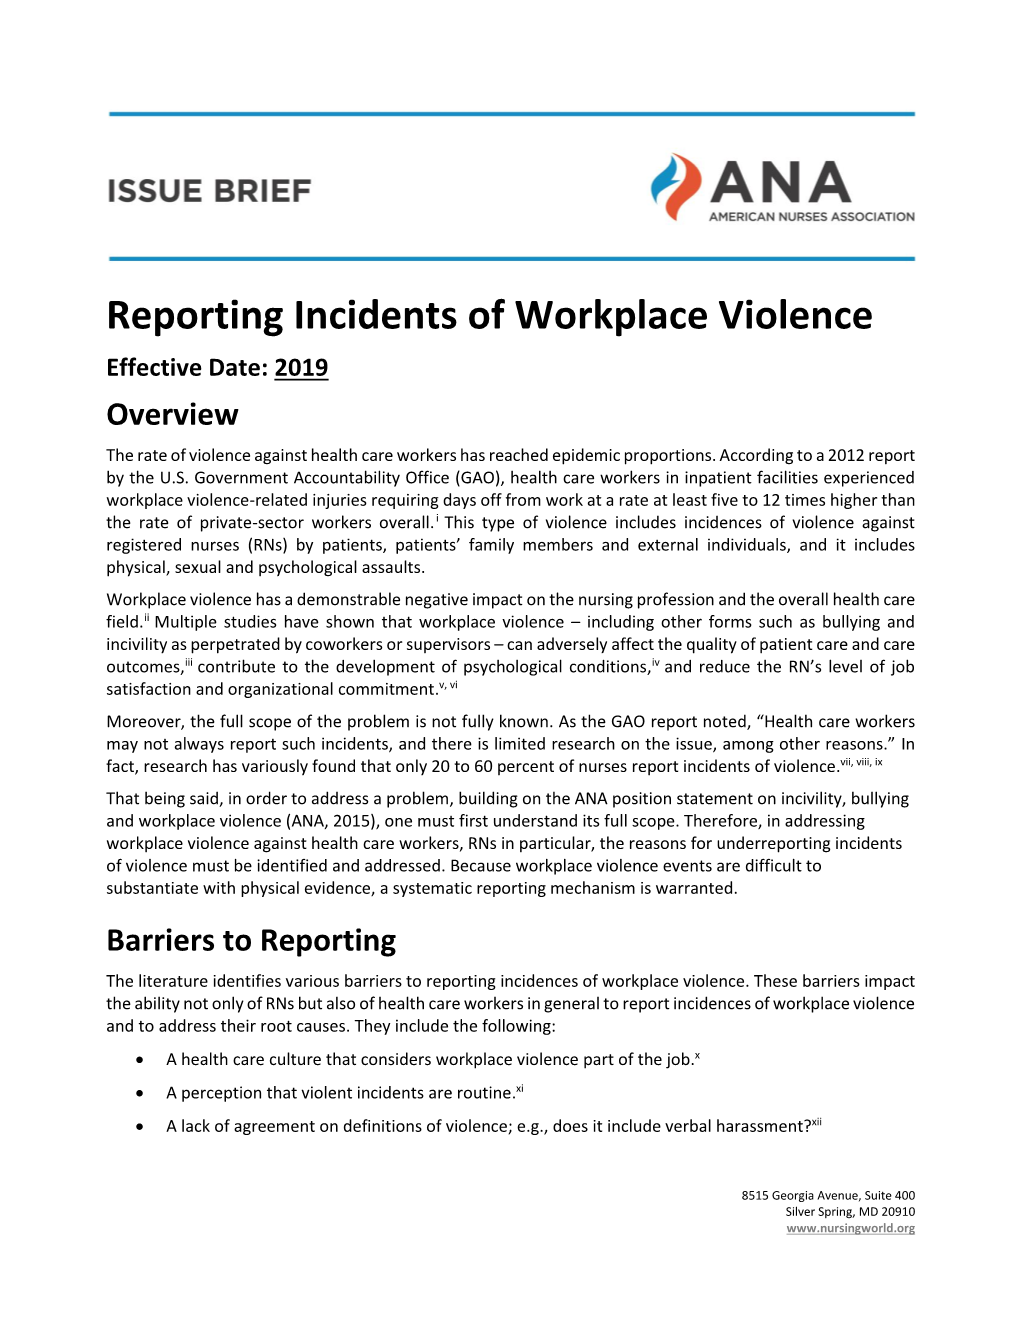 Reporting Incidents of Workplace Violence Effective Date: 2019 Overview the Rate of Violence Against Health Care Workers Has Reached Epidemic Proportions